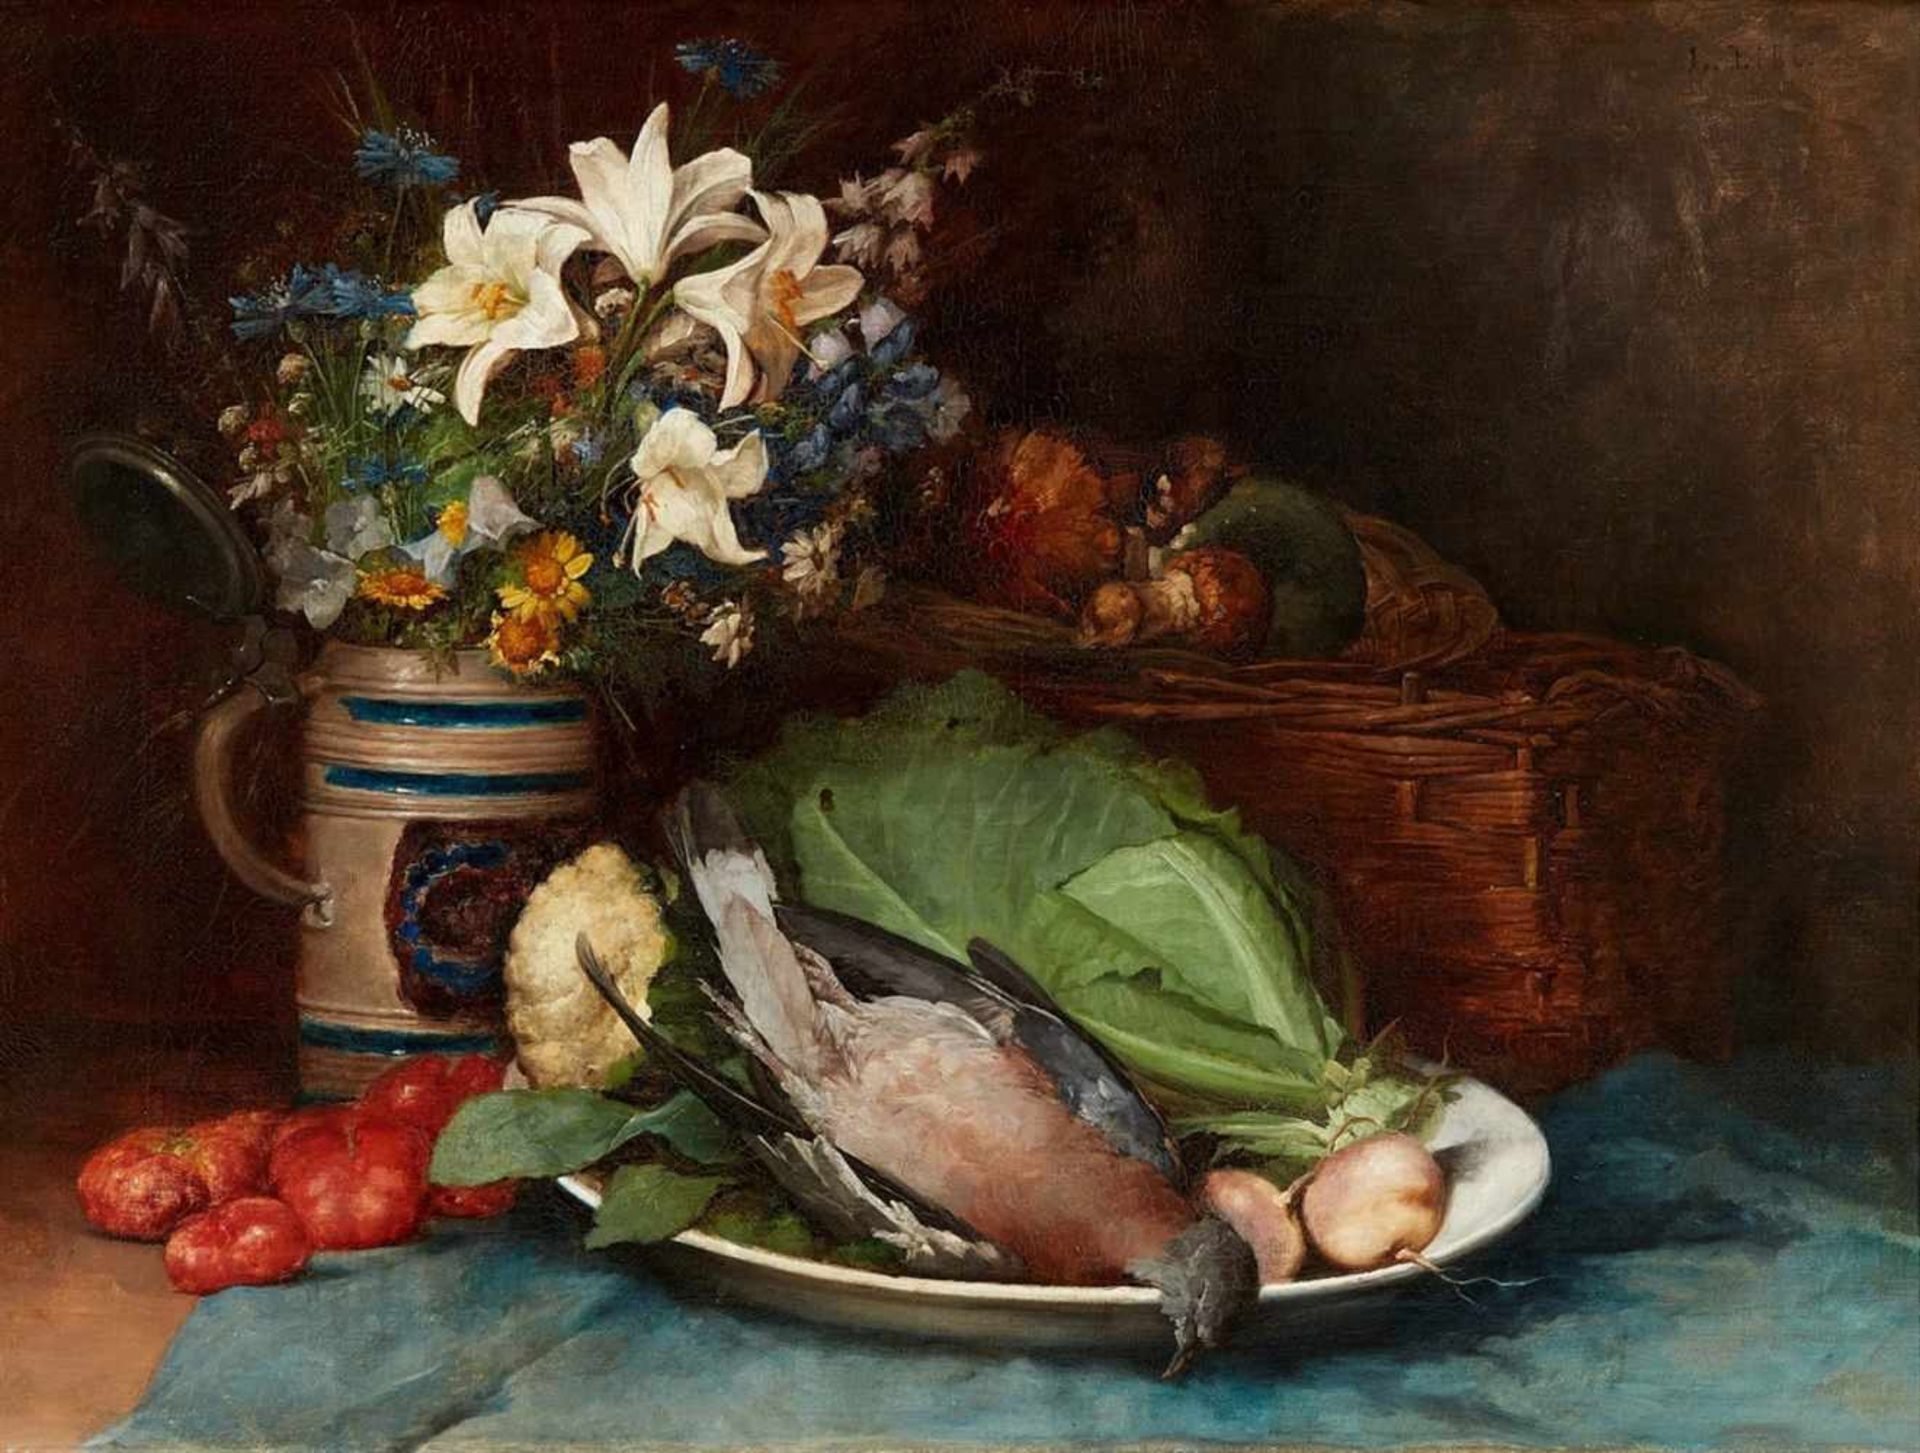 Ludwig EiblStill Life with Flowers in a Pitcher, Vegetables, Mushrooms, and a Pigeon